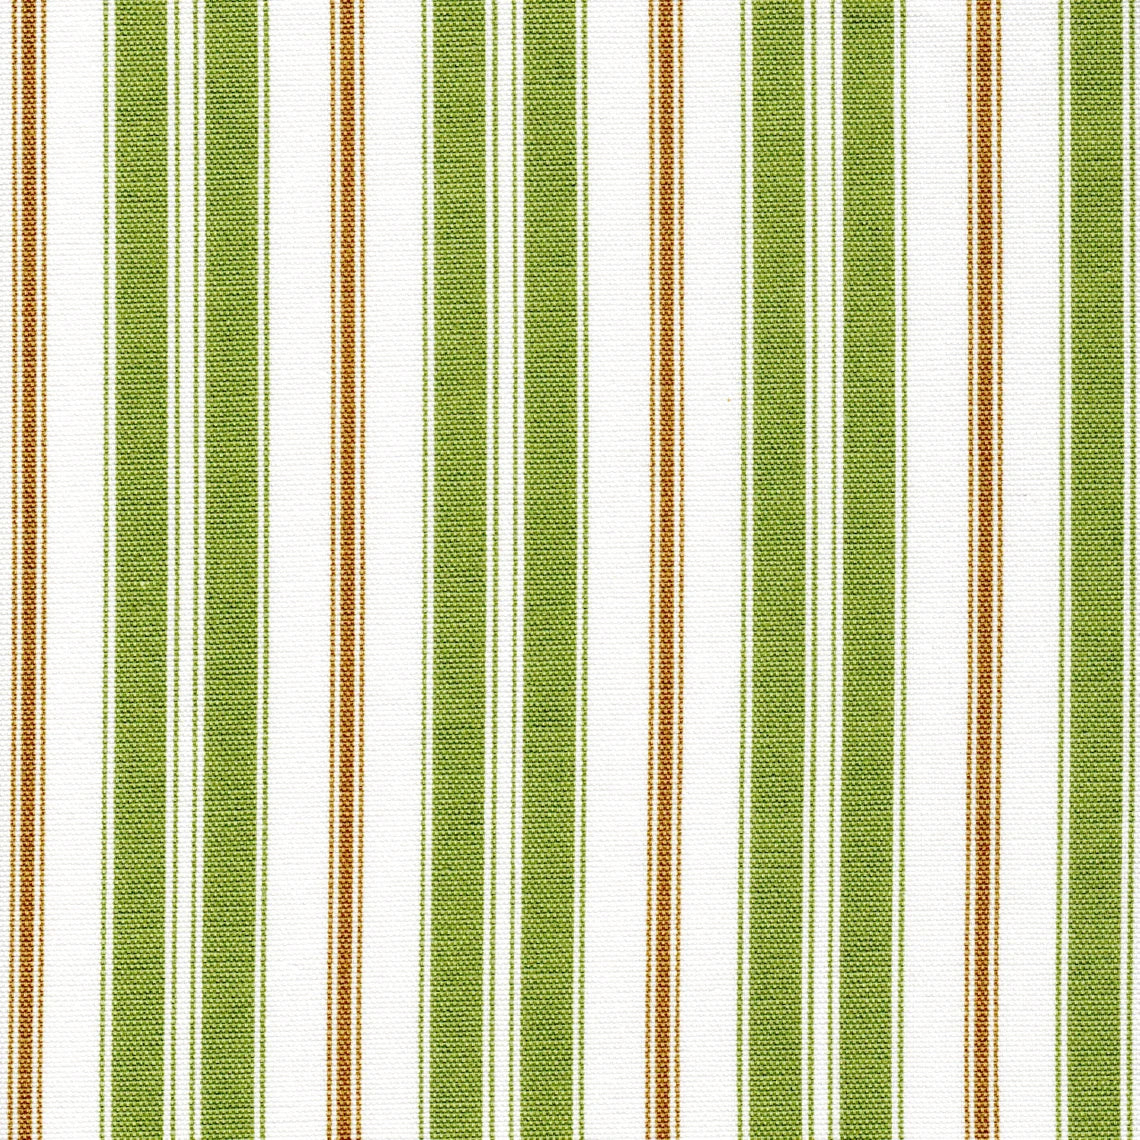 tailored tier cafe curtain panels pair in newbury aloe green stripe- green, brown, white